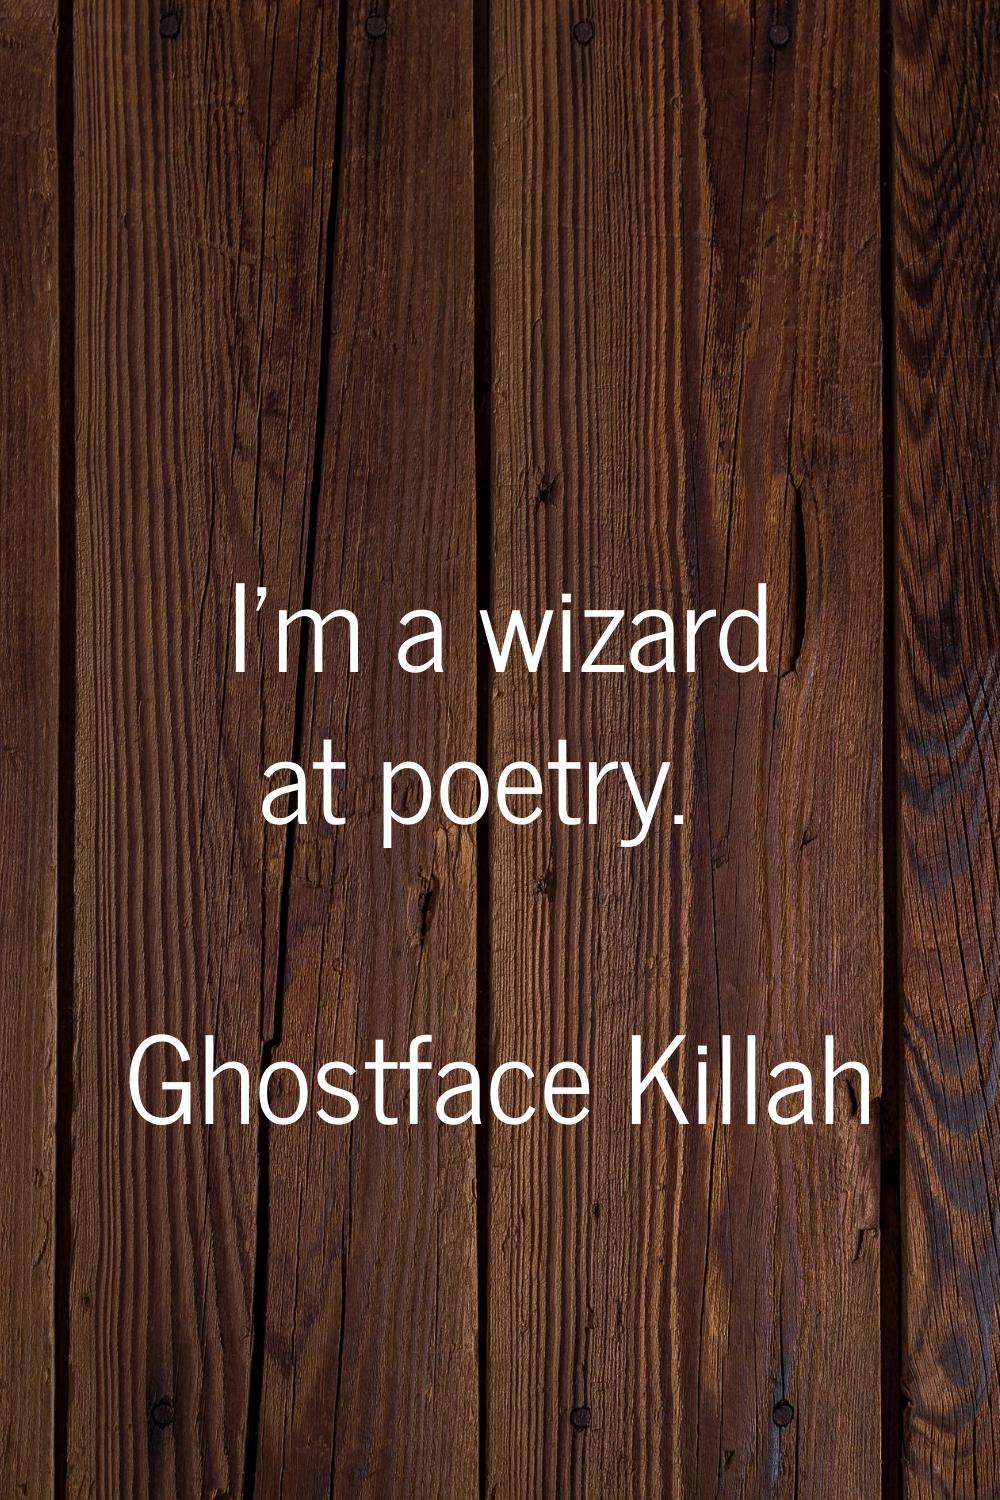 I'm a wizard at poetry.